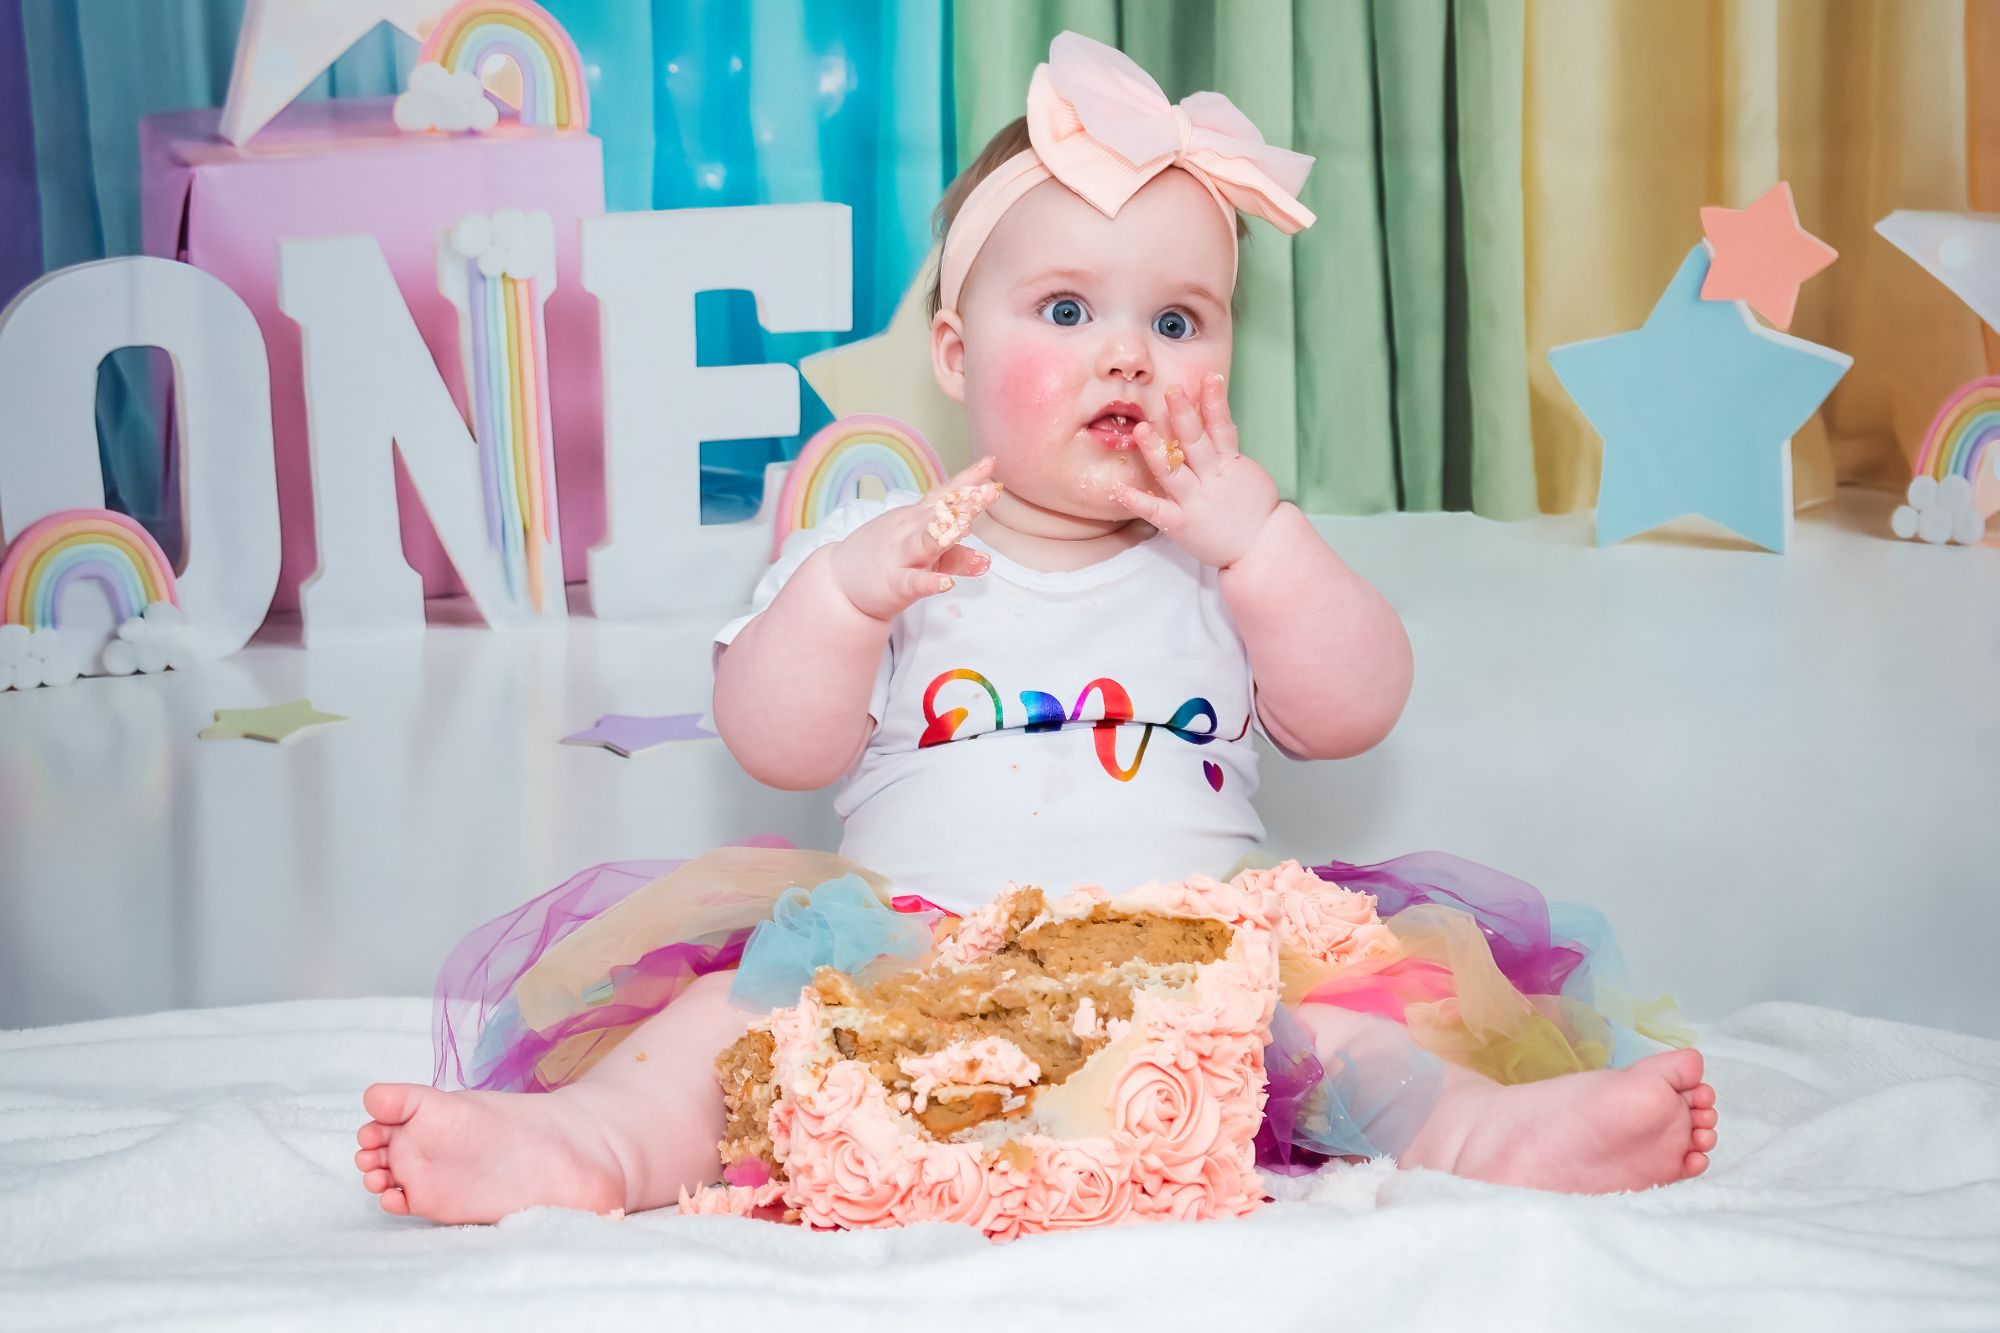 A little girl sits with one hand against her cheeck and the other hovering over her partly smashed cake. Her expression seems to be "oh my gosh is this all for me!"